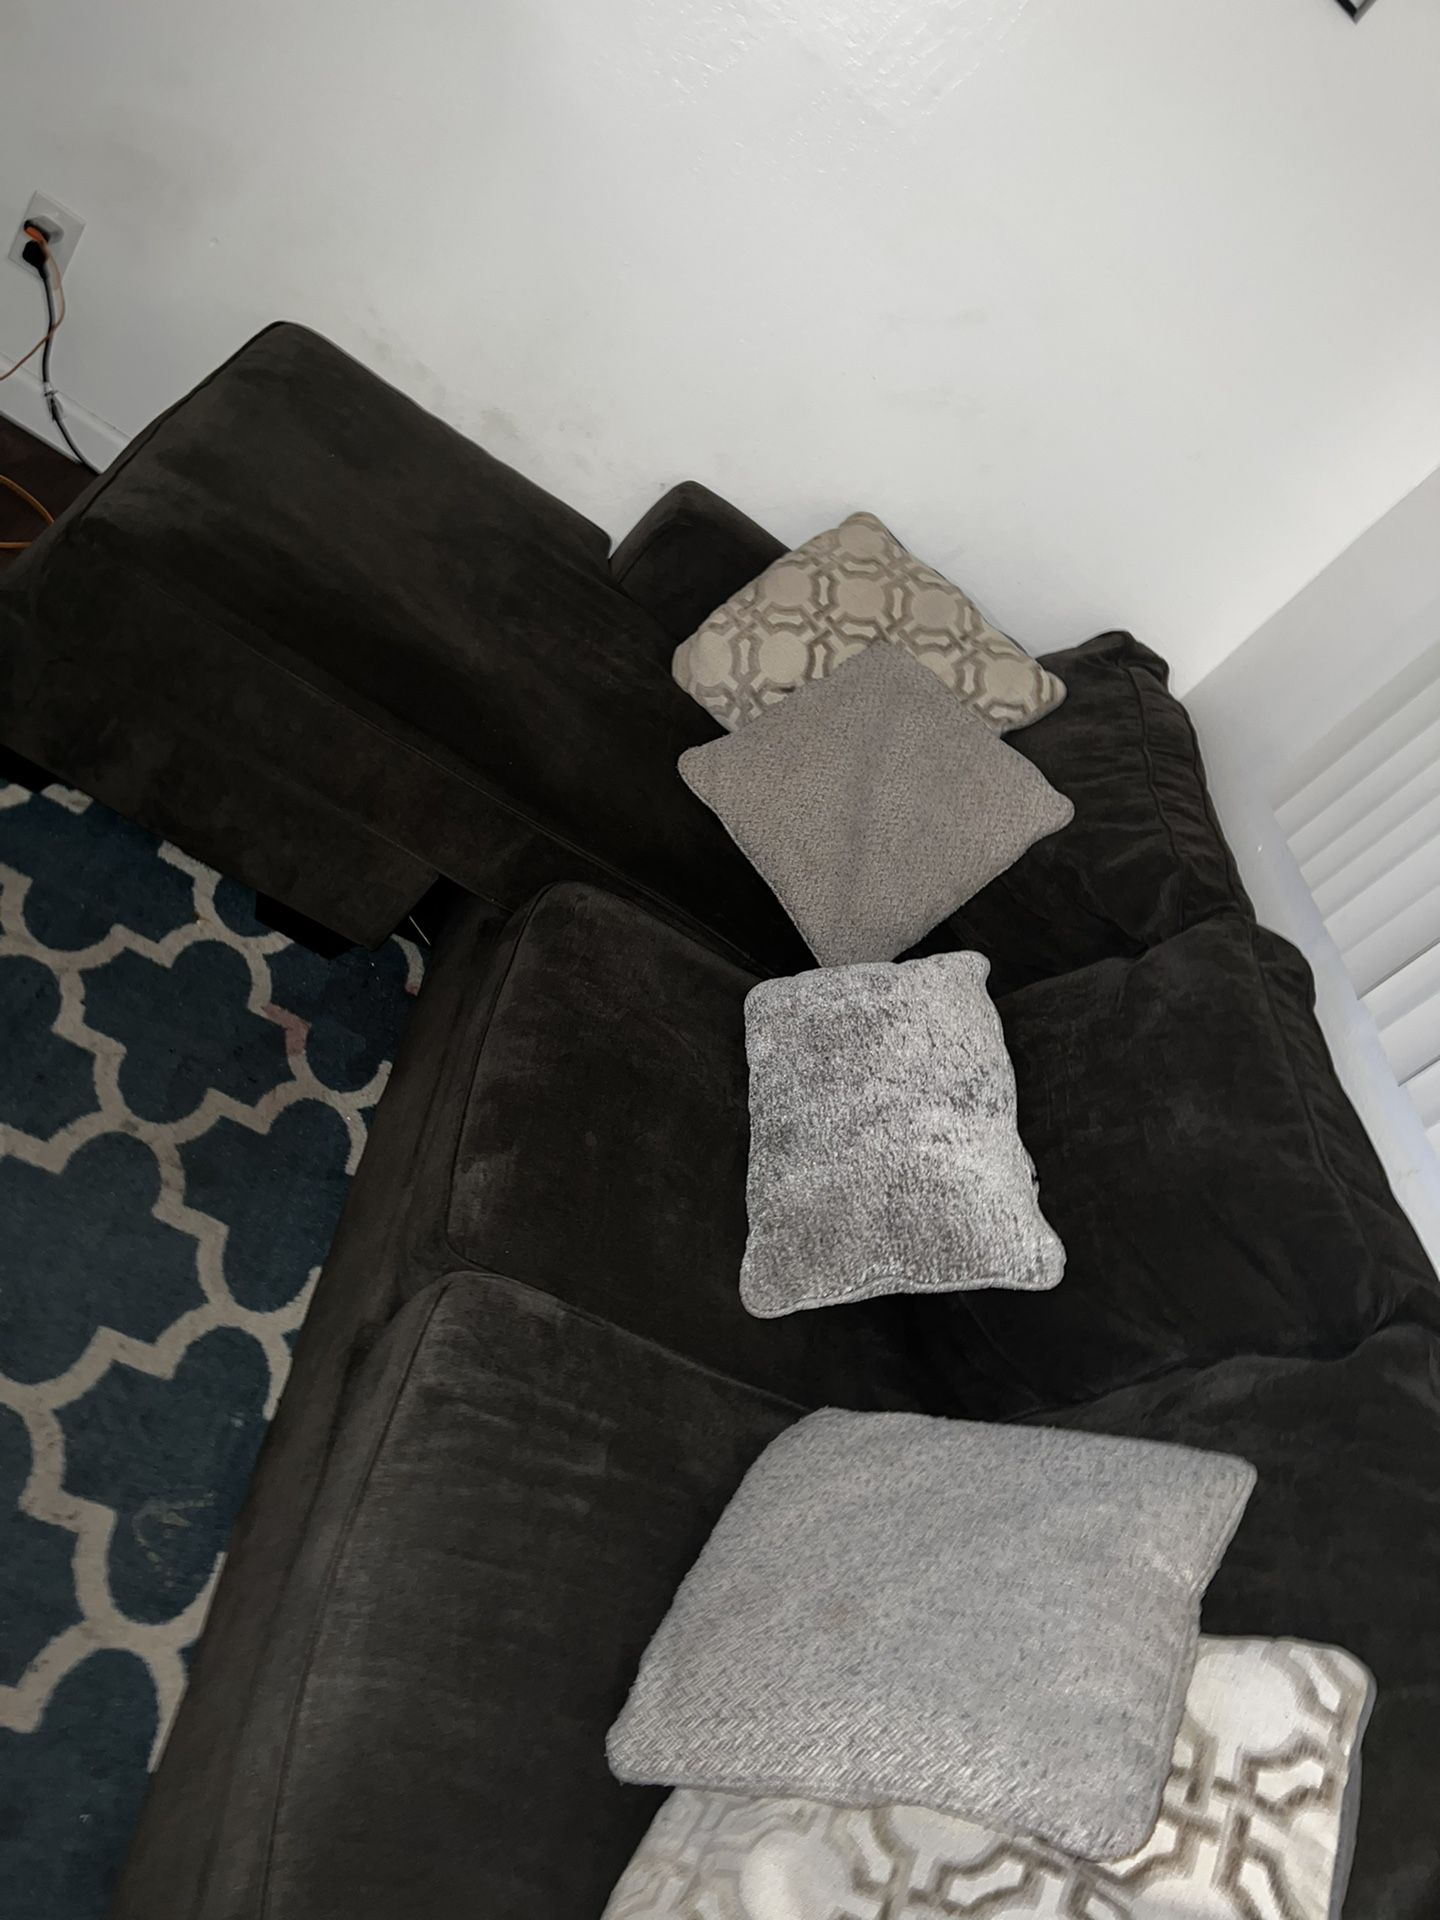 GREY COUCH 